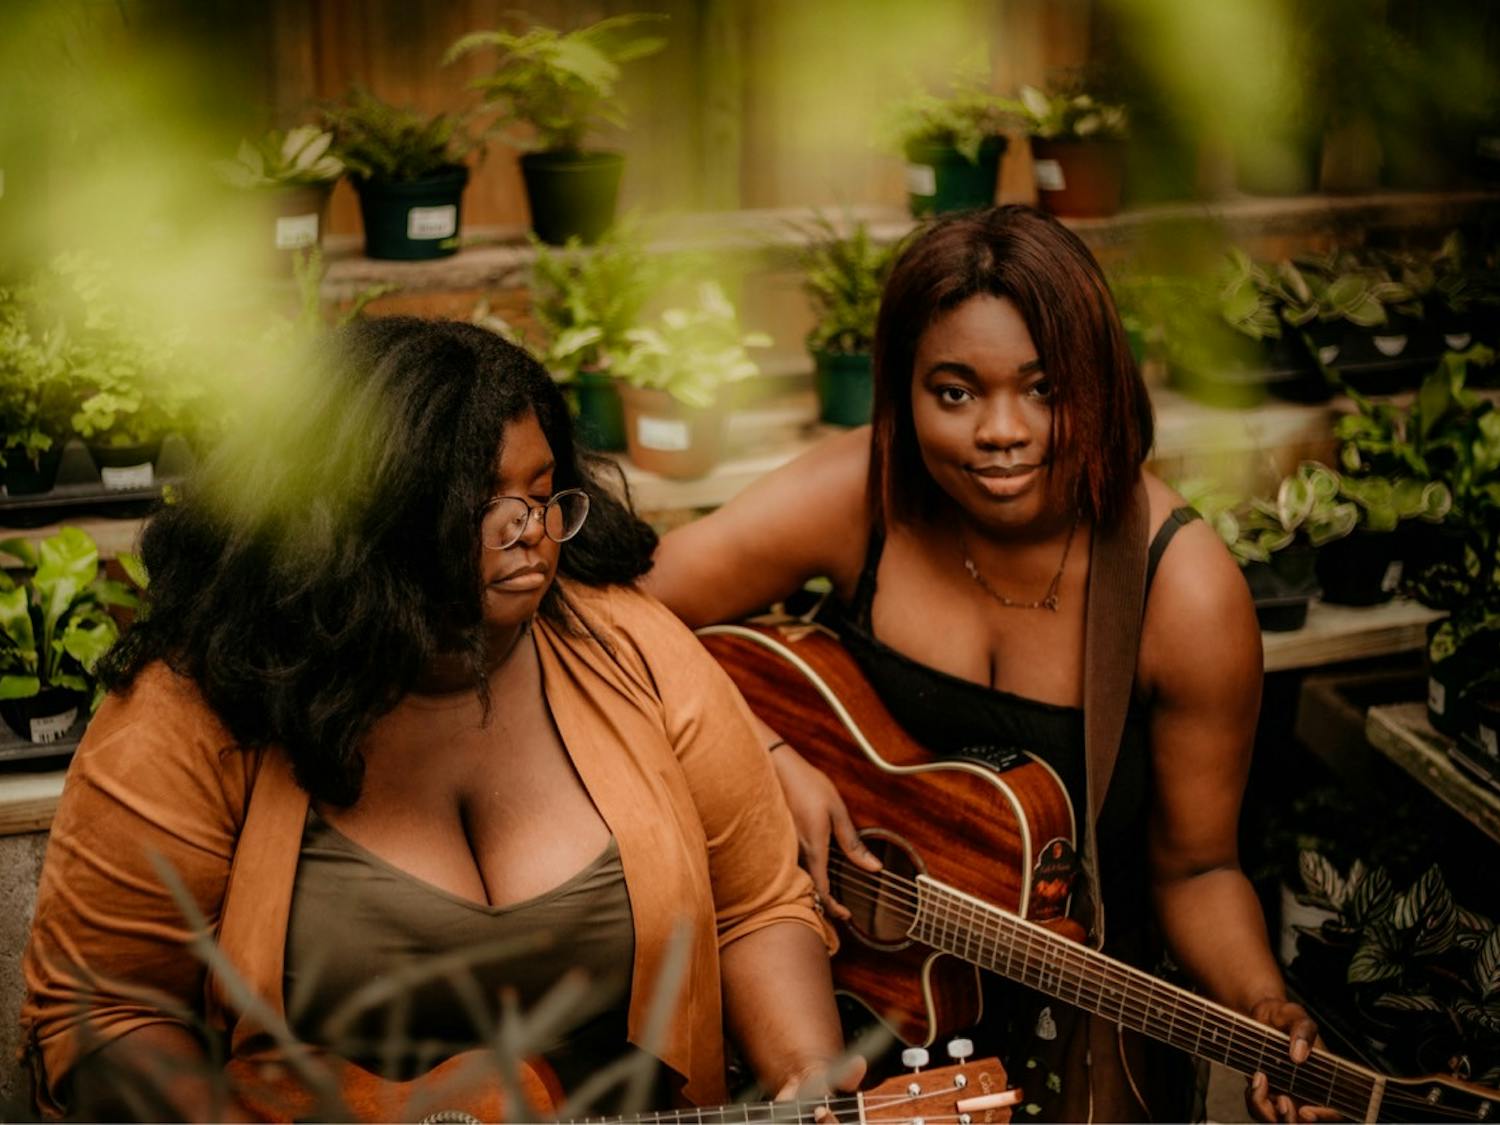 Sister-musician duo Faith & Majesty Smith moved to Gainesville in 2019 and recently signed to local music label Swamp Records.